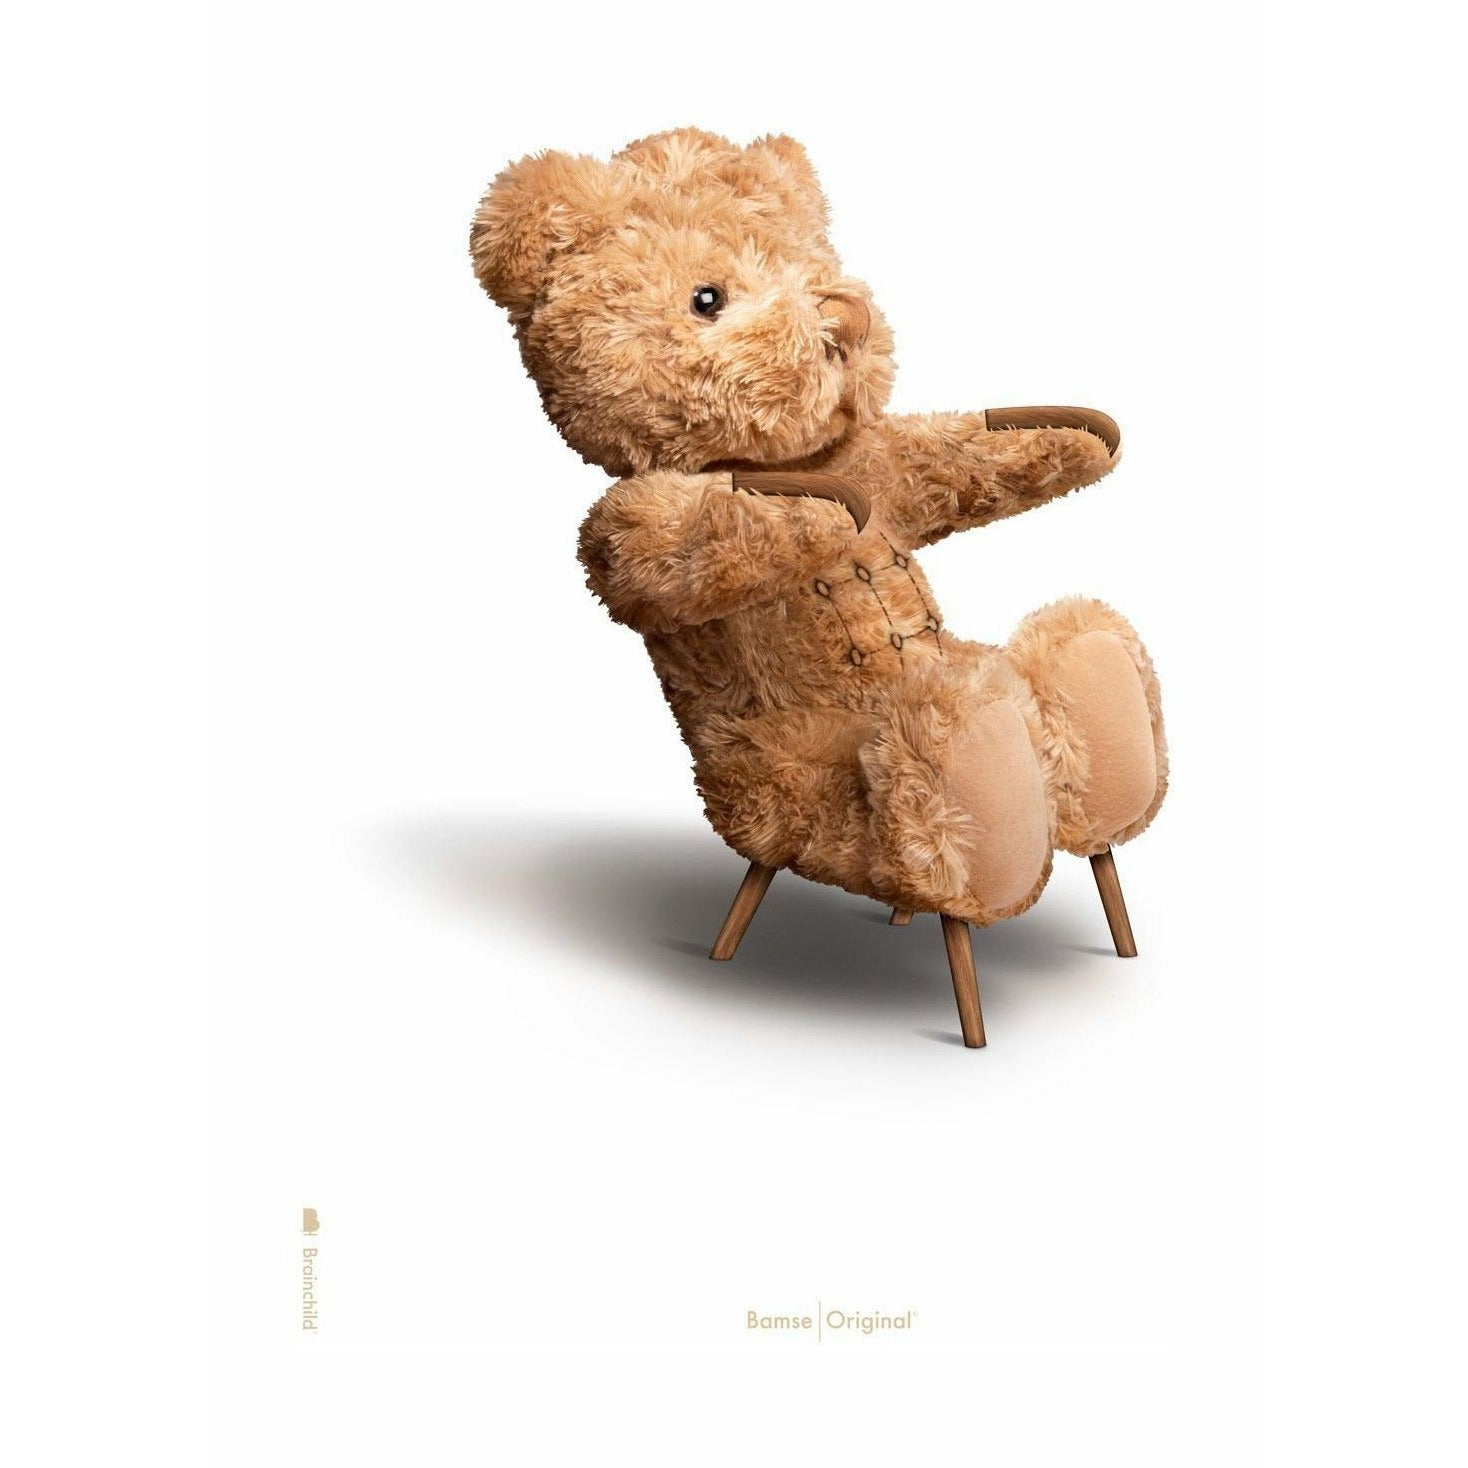 Brainchild Teddy Bear Classic Poster Without Frame 30x40 Cm, White Background